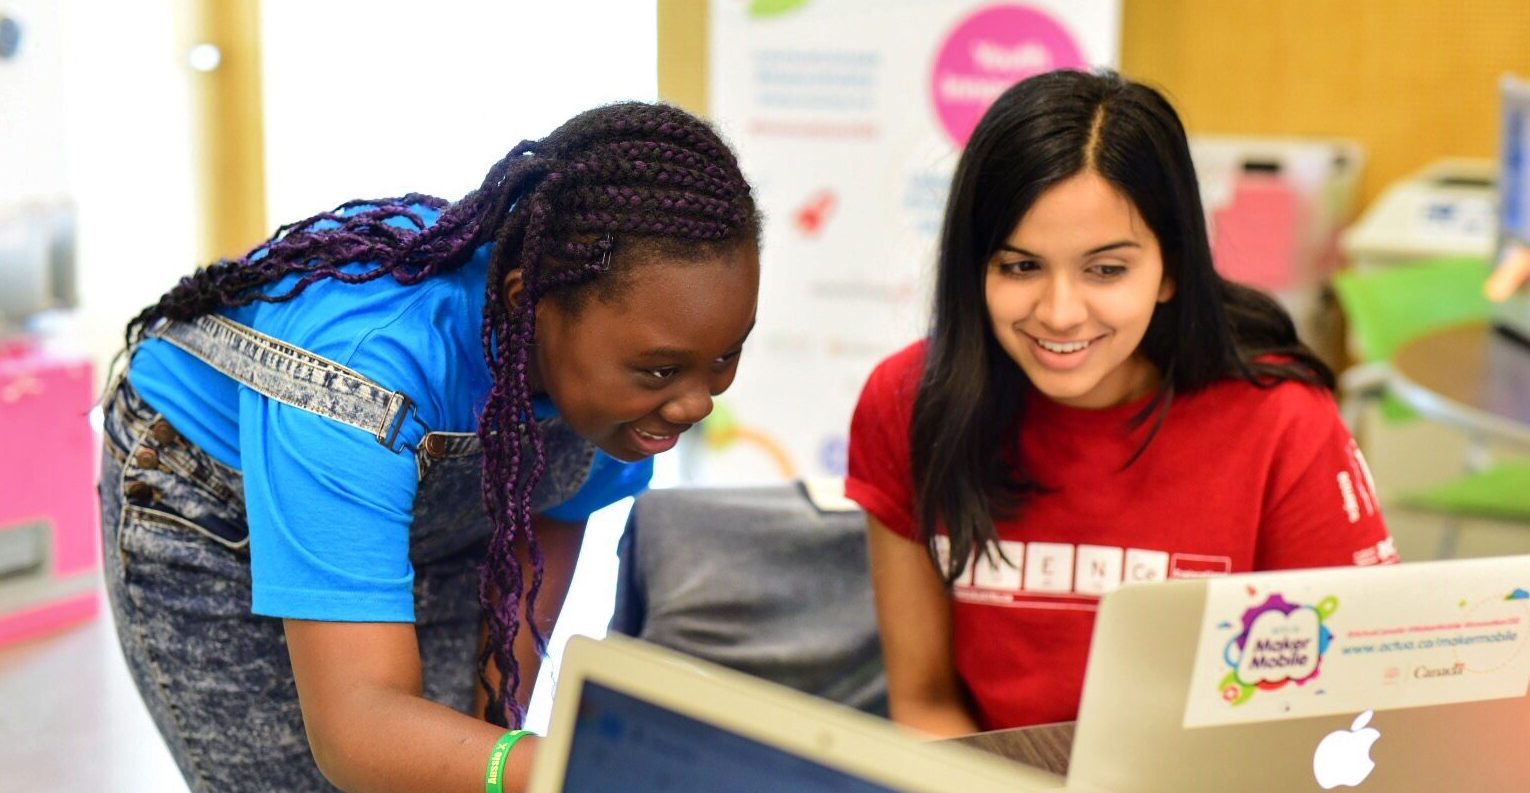 Two young females looking at something on the computer to demonstrate the interactivity of the workshops.